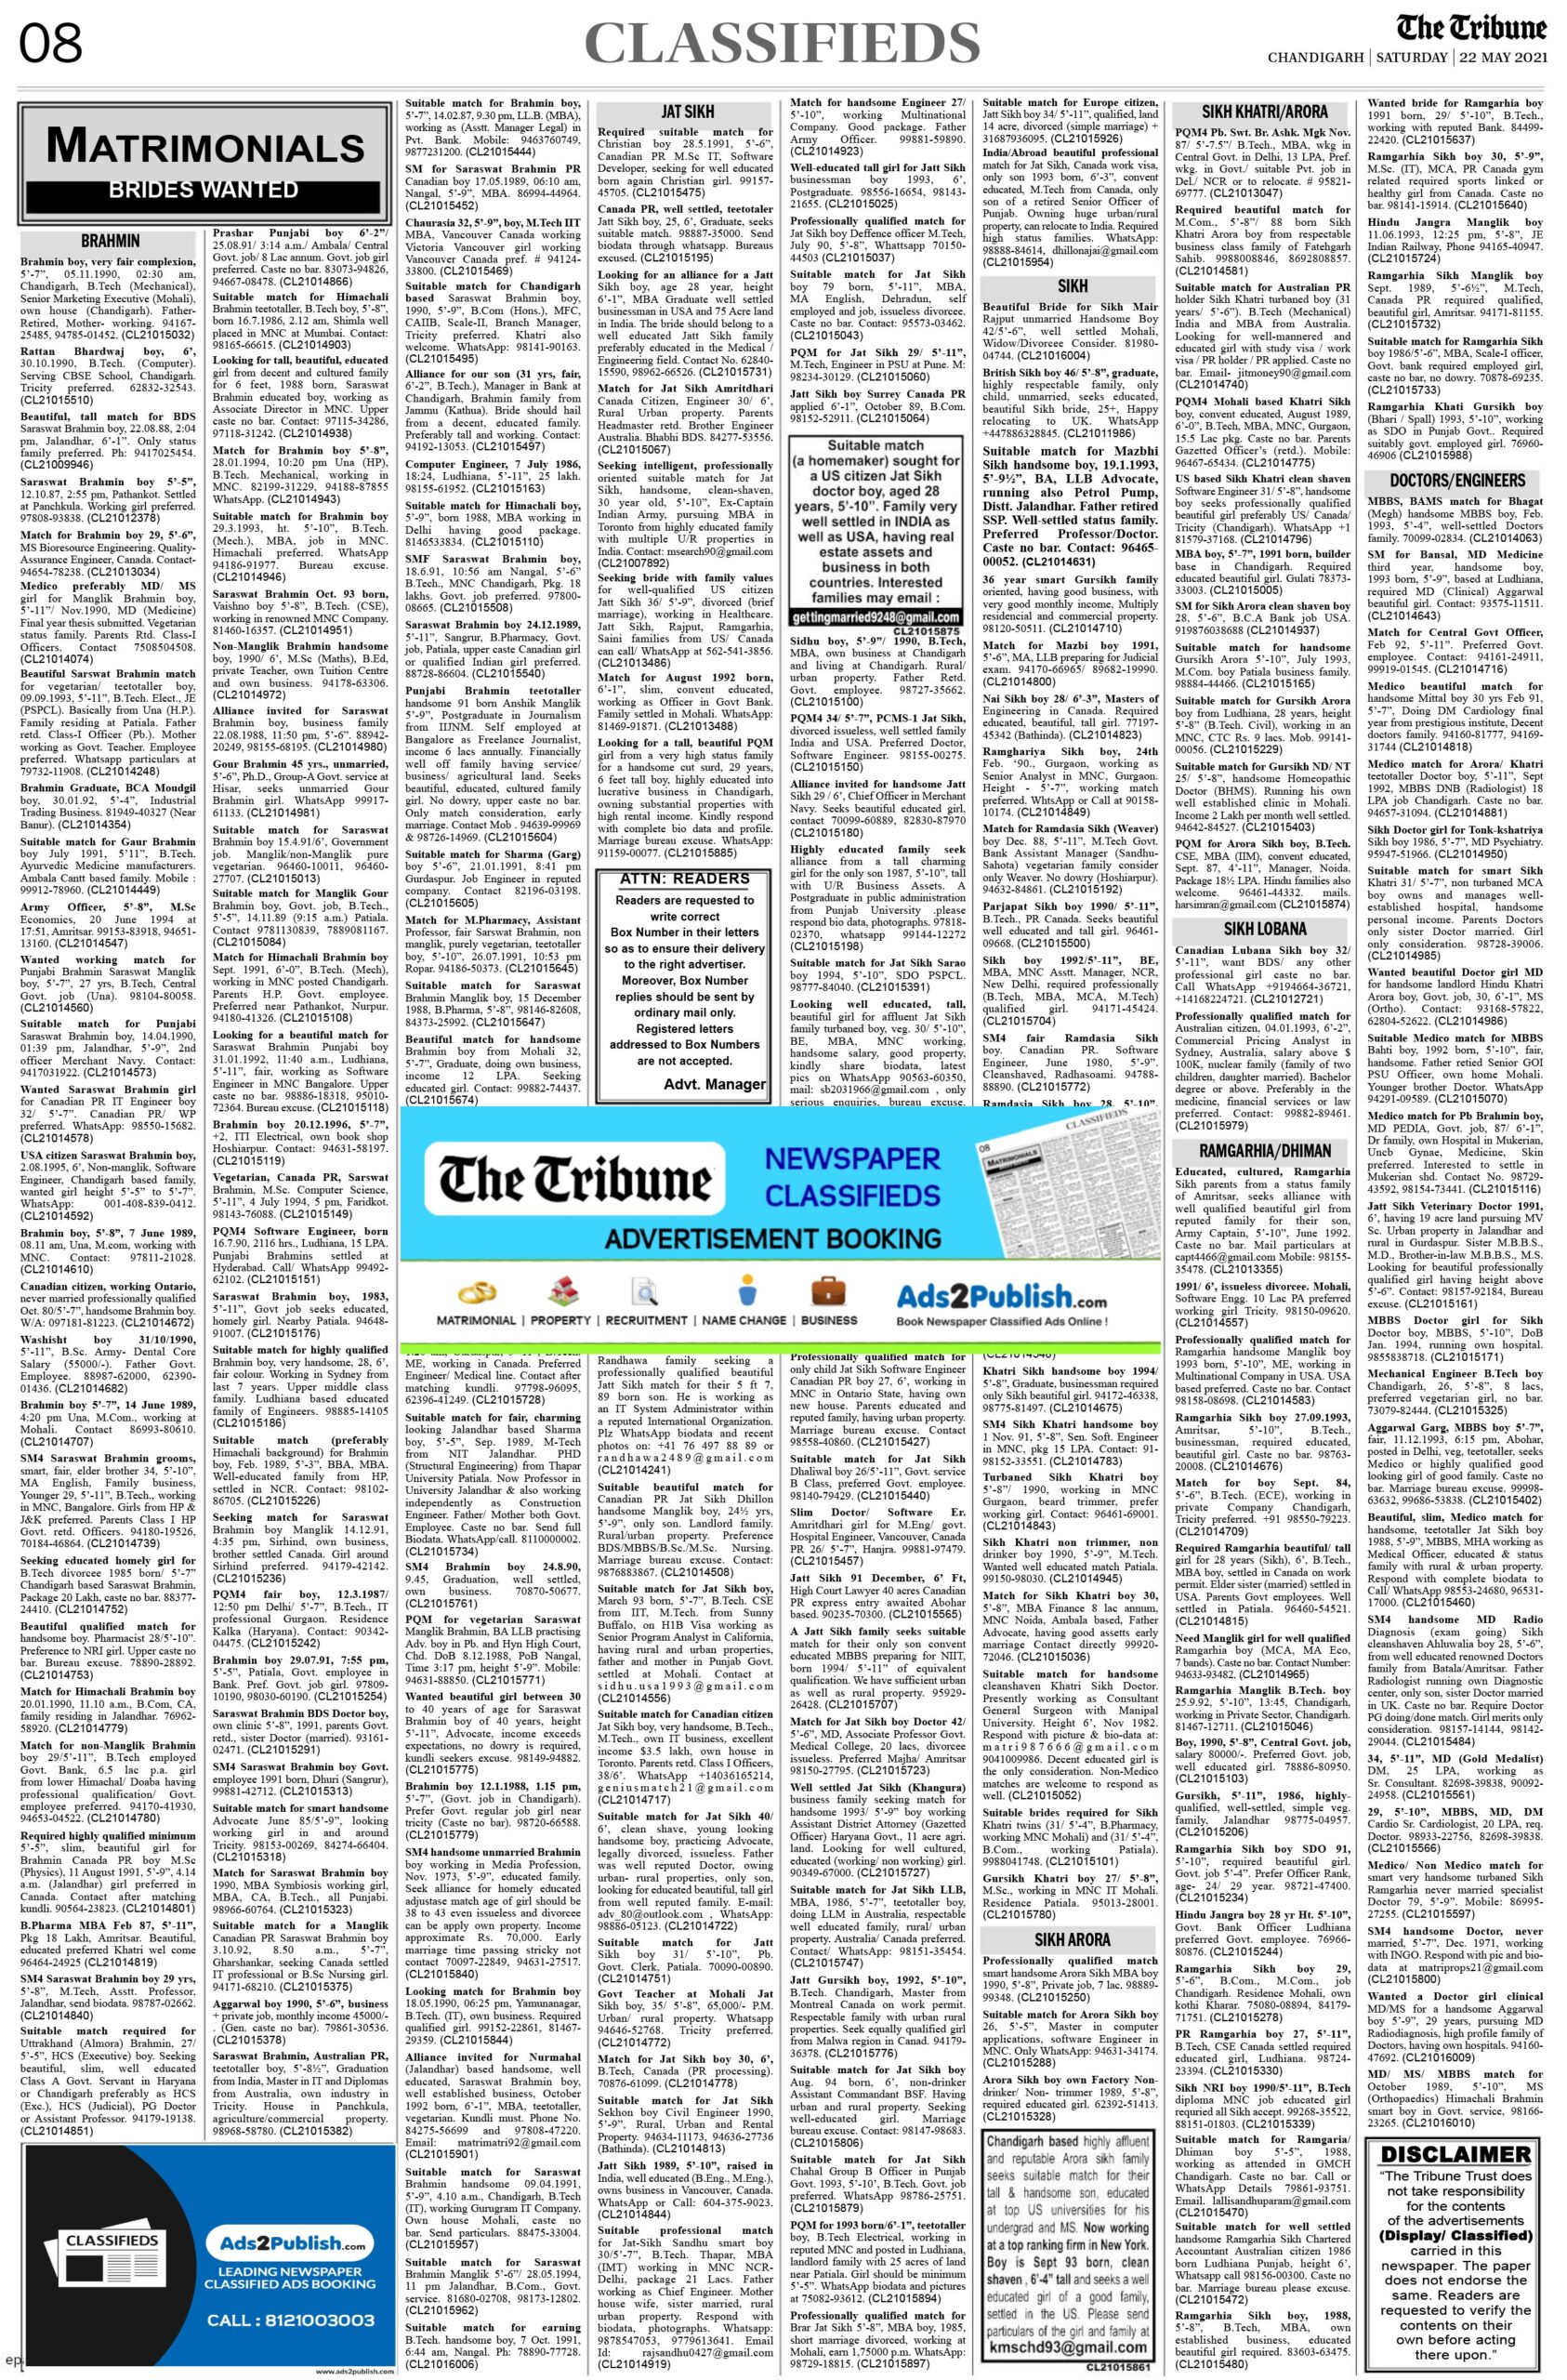 the-tribune-22-5-2021-matrimonial-wanted-bride-classified-paper